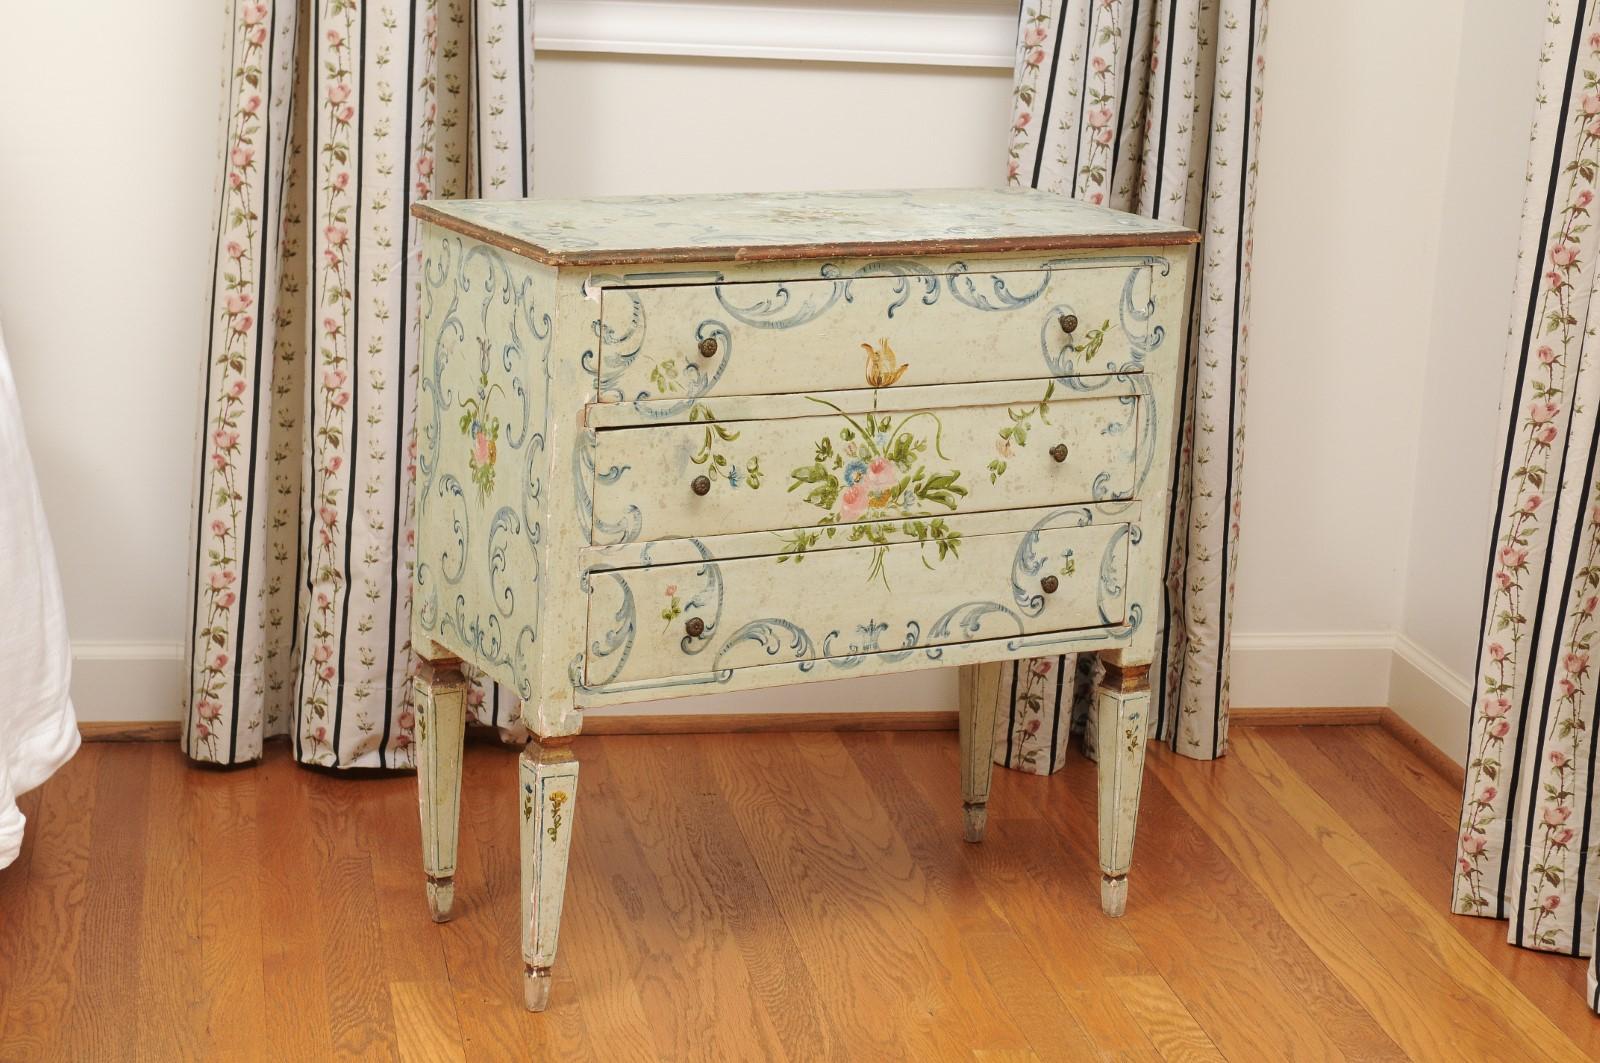 A French Napoléon III three-drawer chest from the late 19th century, with painted floral decor. Created in France at the end of Emperor Napoléon III's reign, this chest features a linear Silhouette, adorned with a delicate decor of flowers and